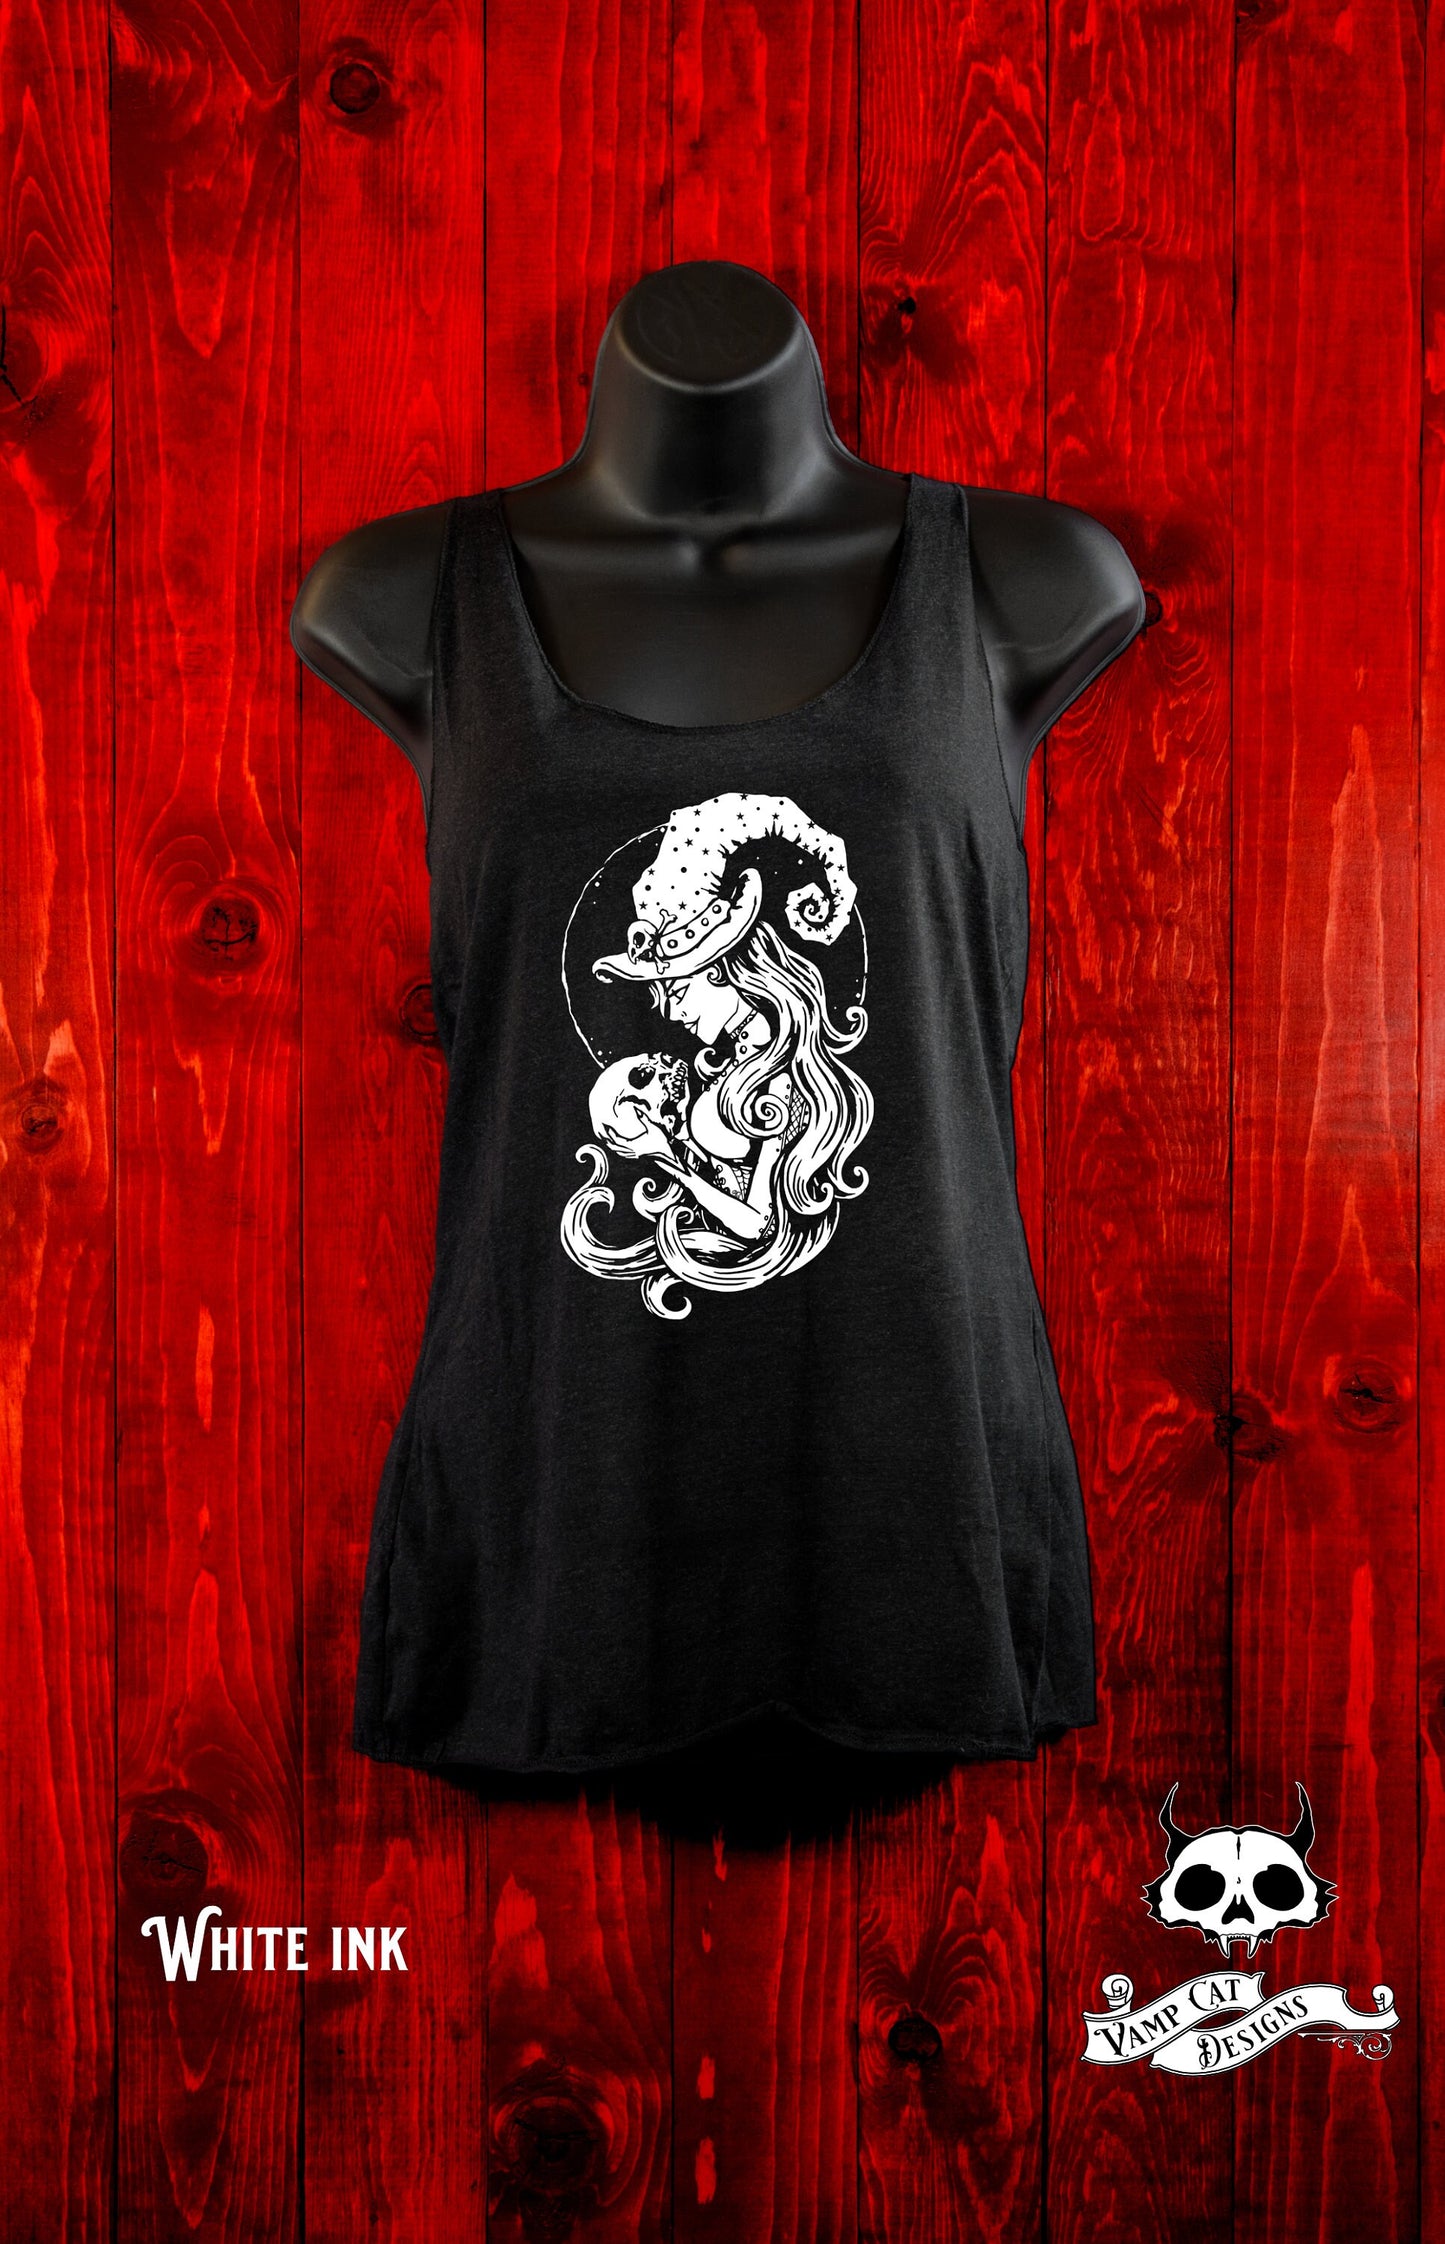 Skull Witch-Tank Top-Witchy Art Apparel-Graphic Tee-Gothic Clothing-Skulls And Bones Art-Occult Art-Halloween Women's Tee-Fall Shirt-Witchy